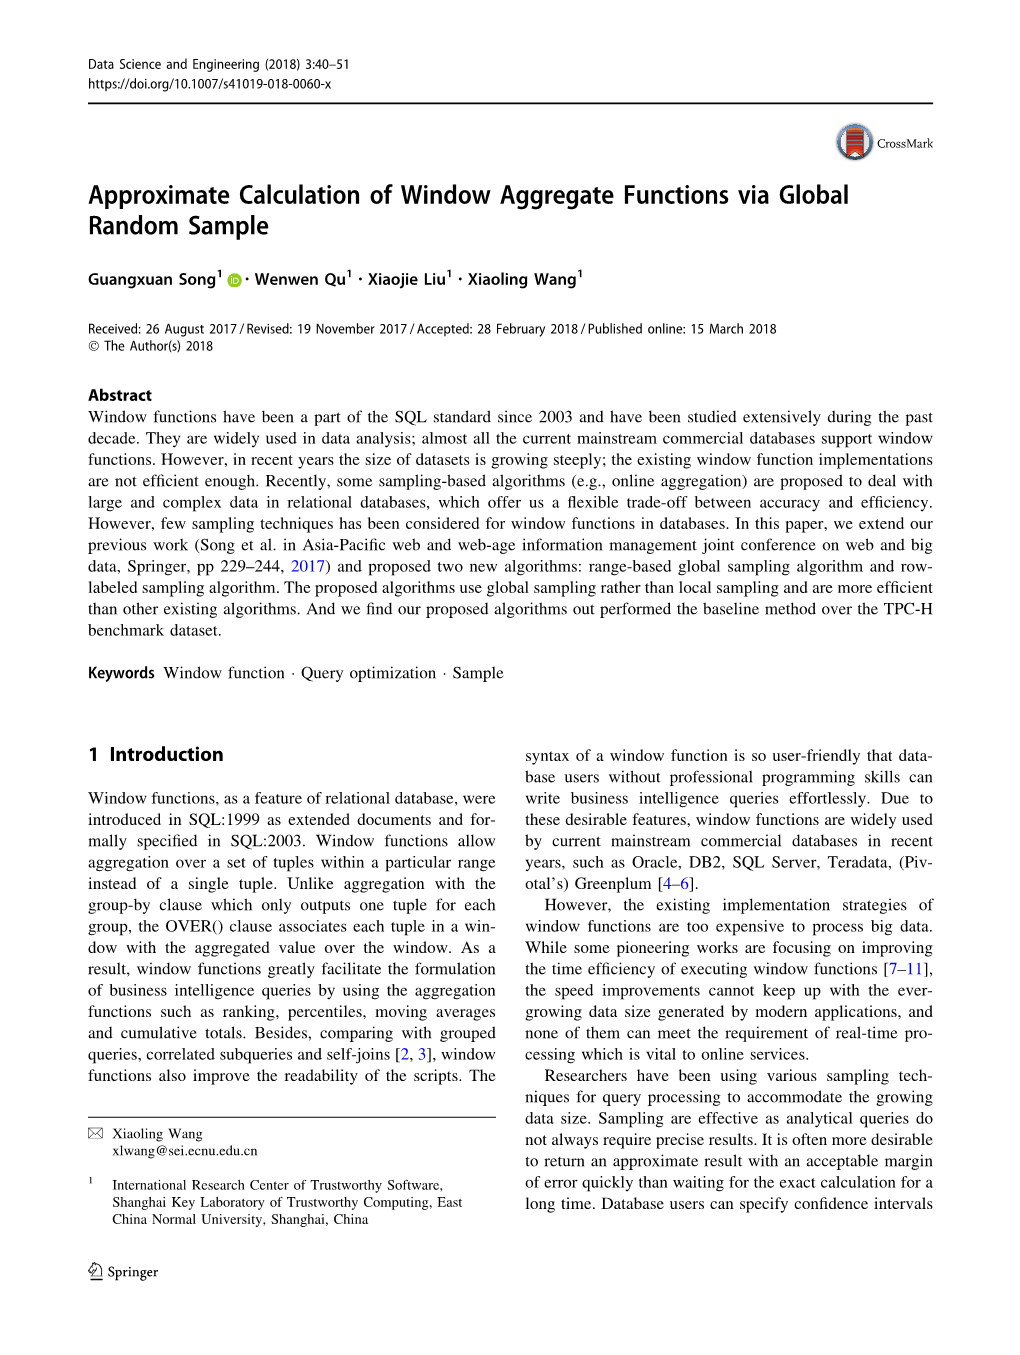 Approximate Calculation of Window Aggregate Functions Via Global Random Sample